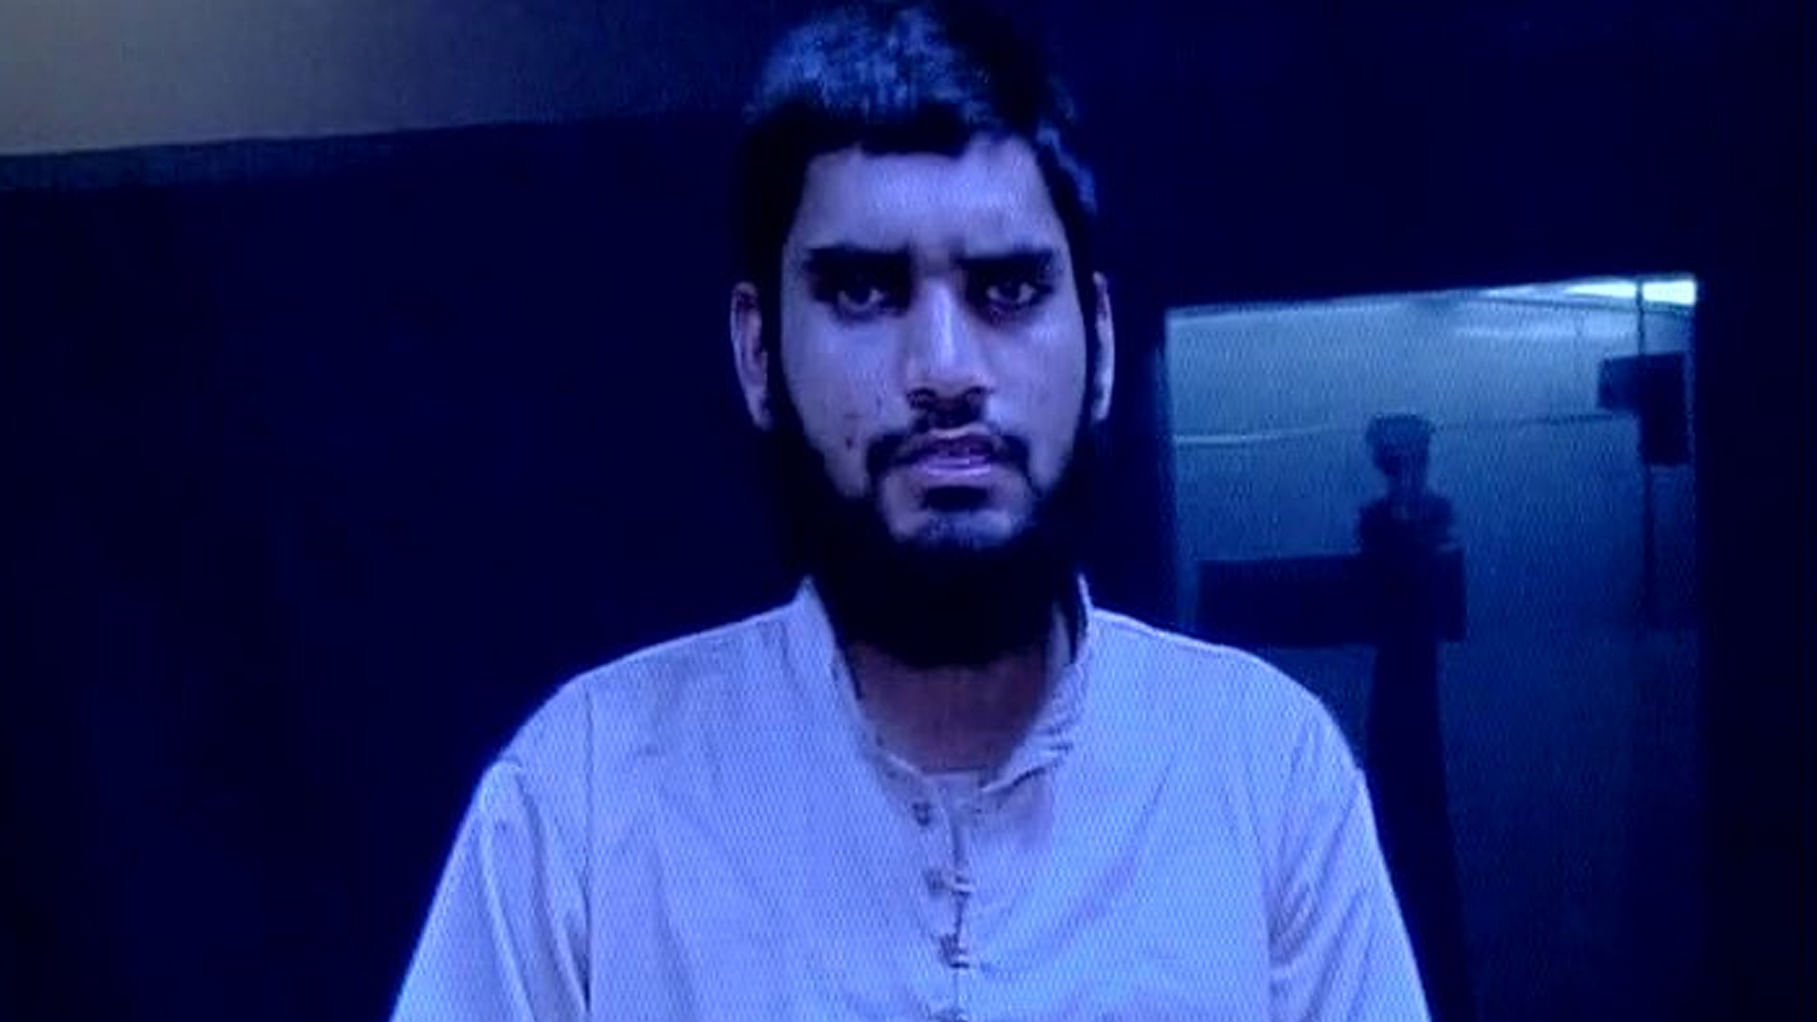 Bahadur Ali in the confession video released by the NIA. (Photo: ANI Screenshot)